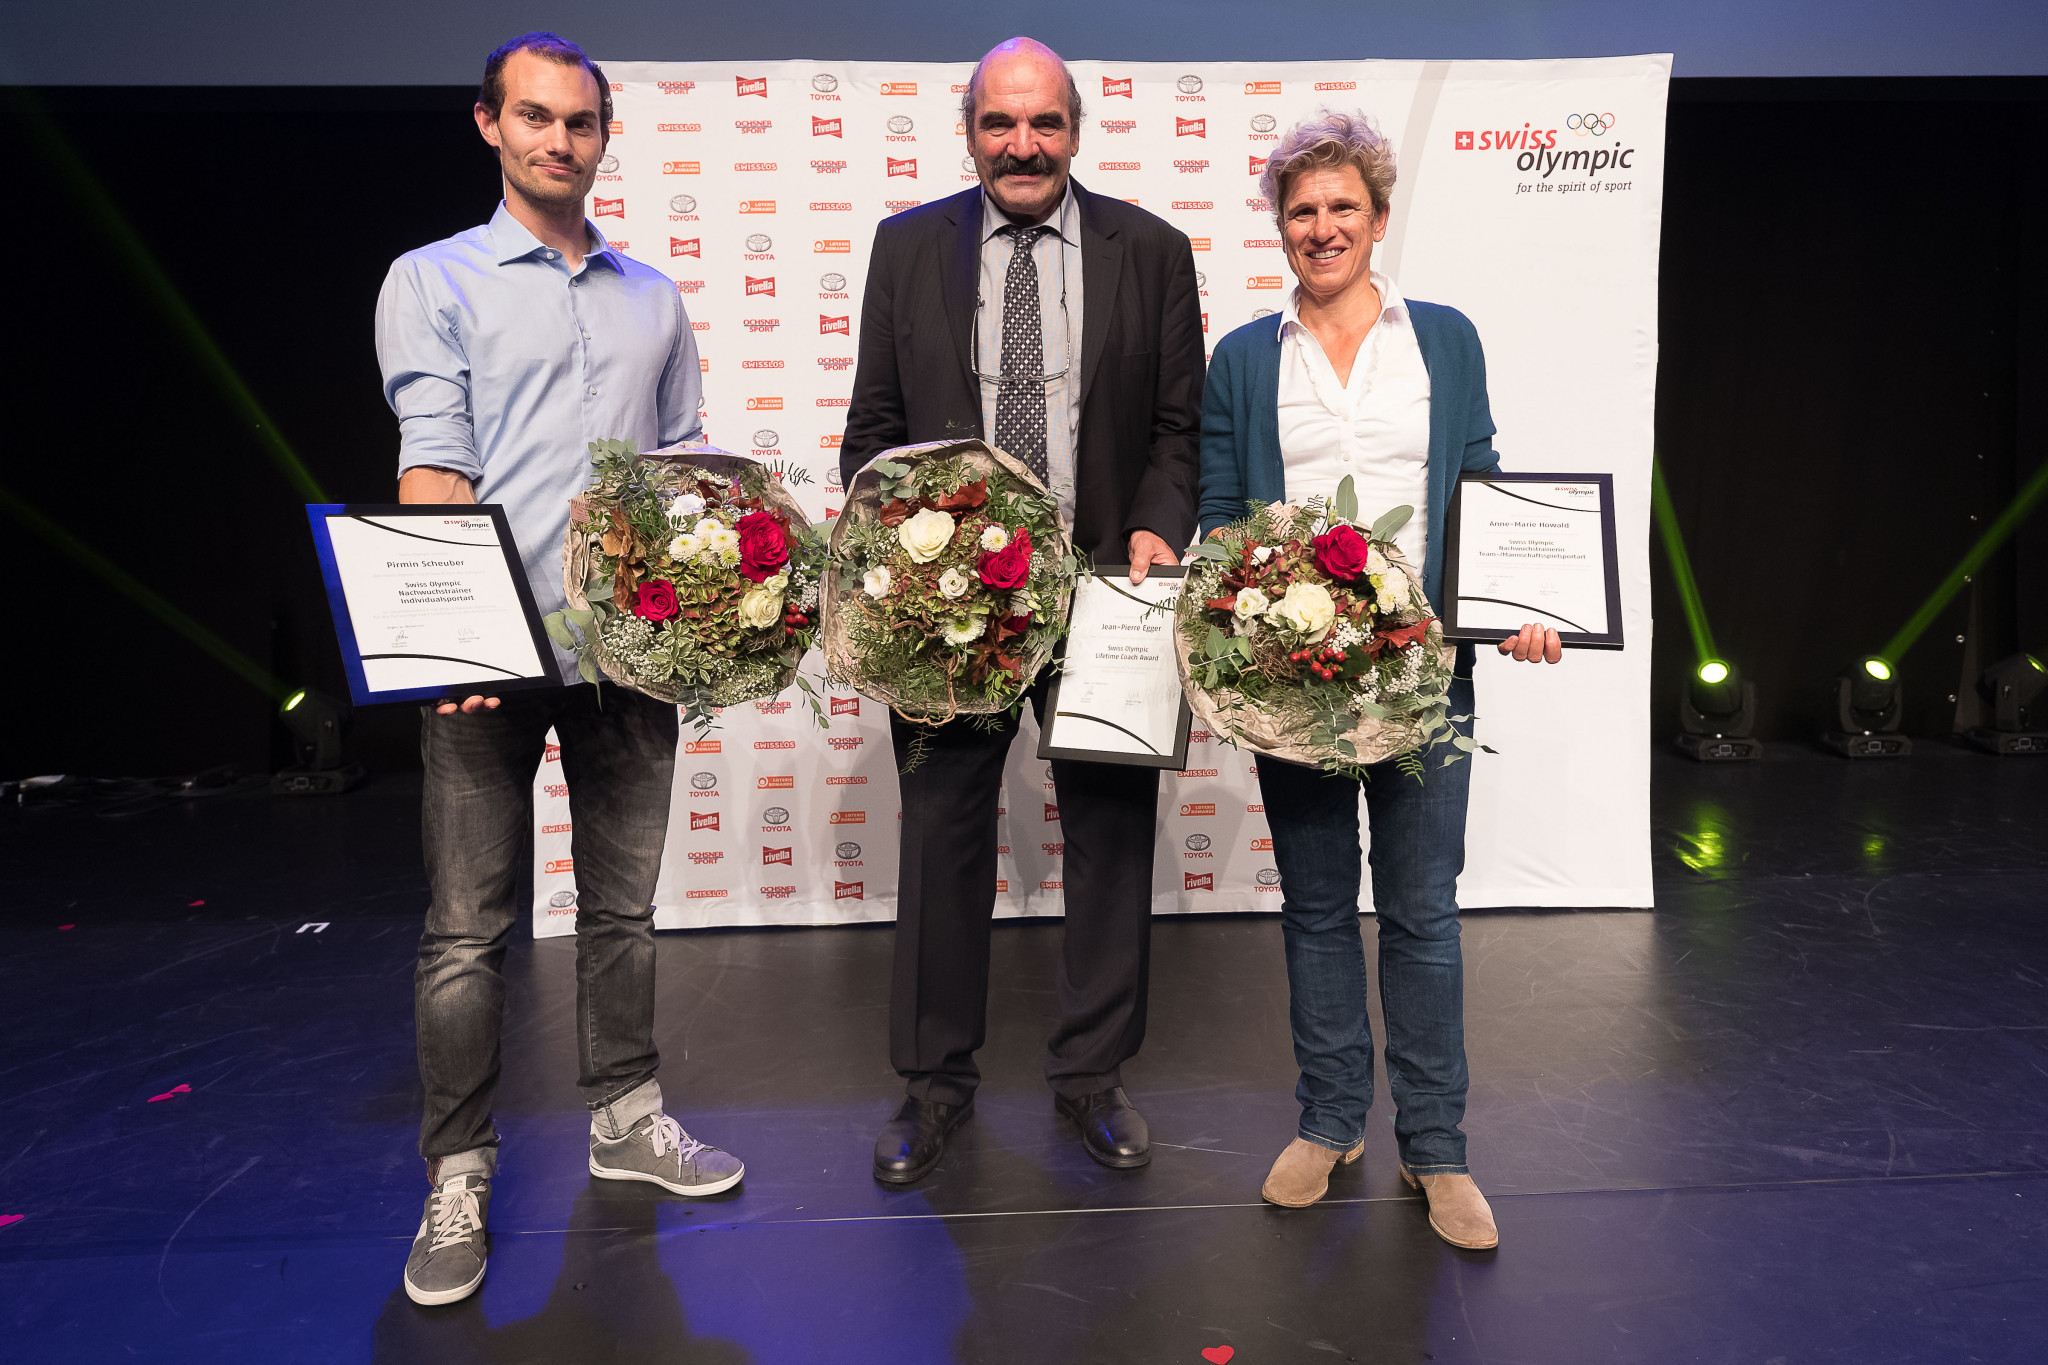 Swiss Olympic honours achievements of coaches at annual awards ceremony